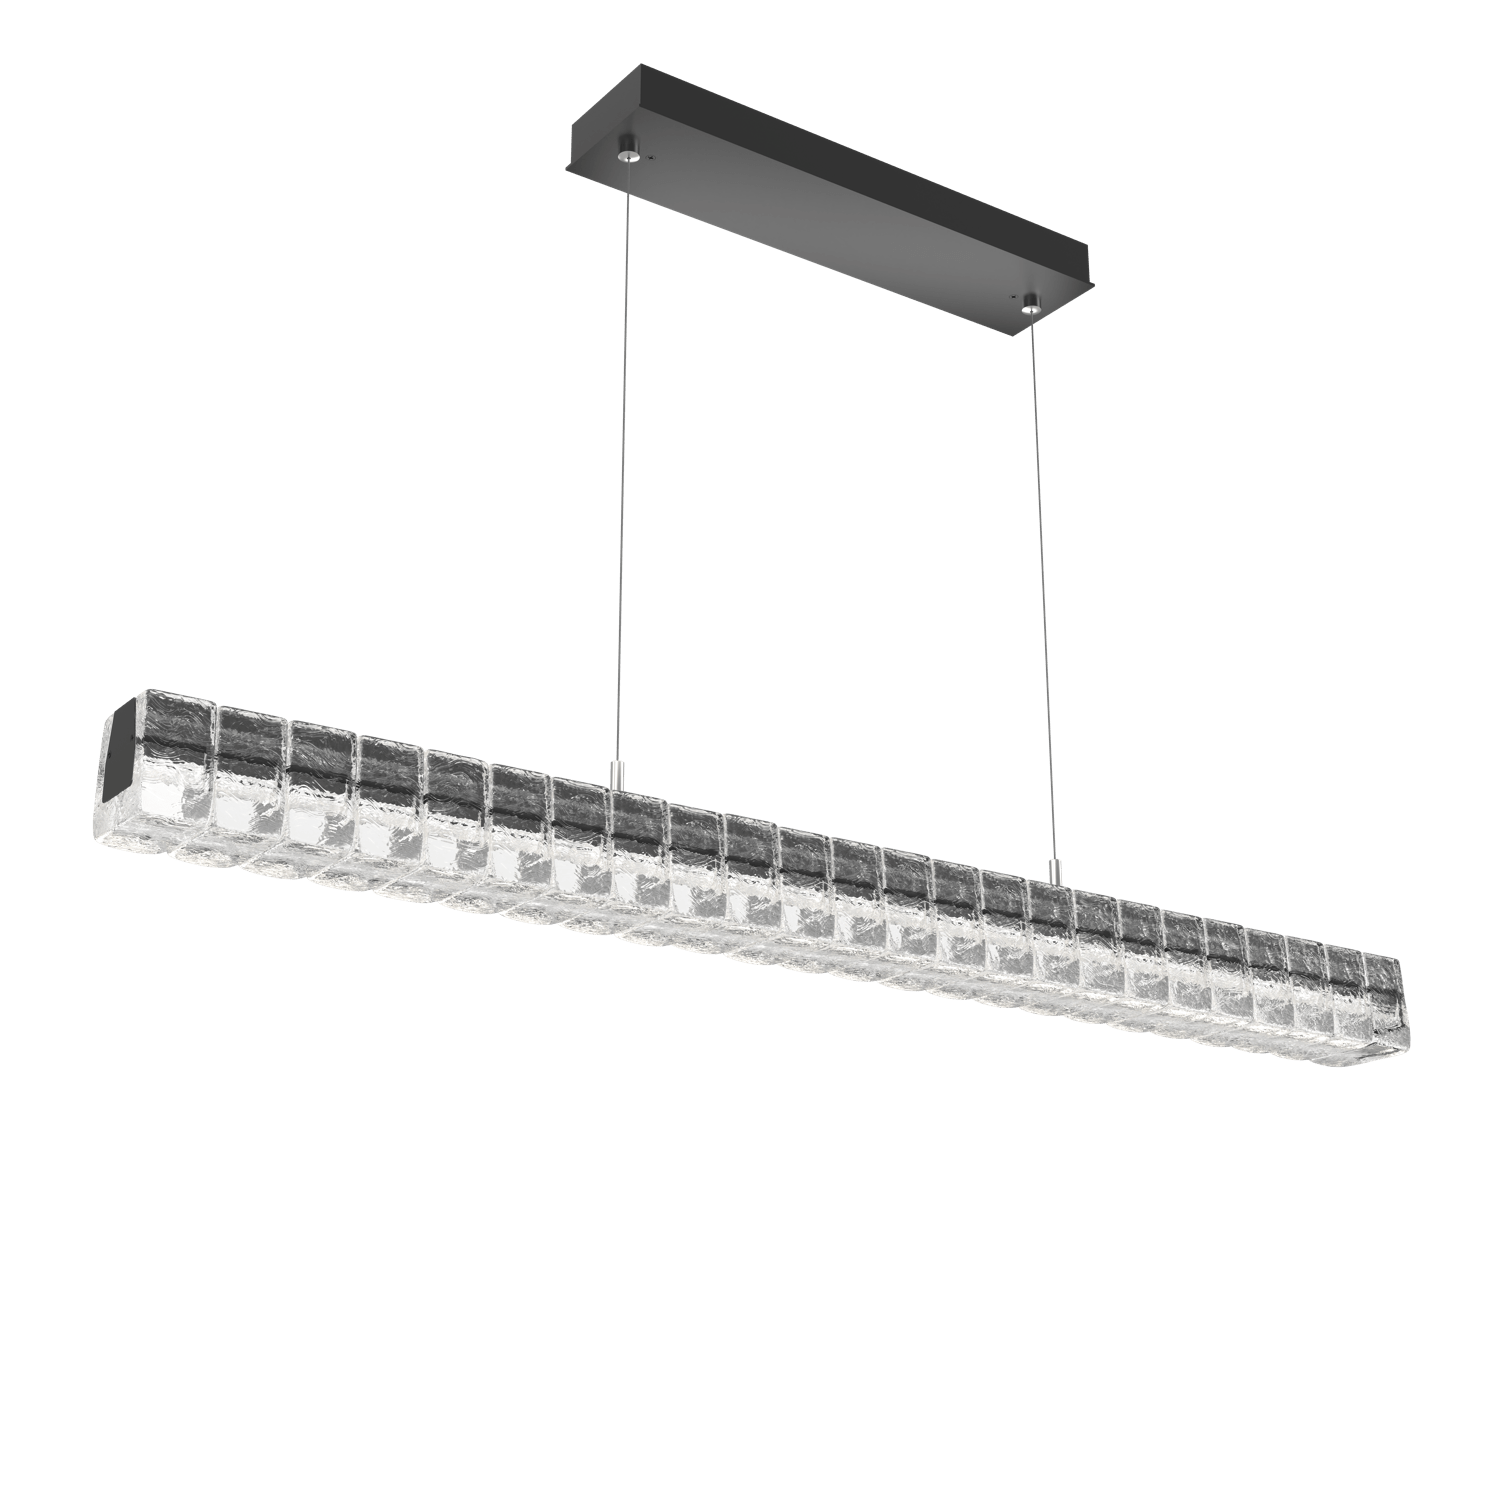 PLB0080-48-MB-Hammerton-Studio-Asscher-48-inch-linear-chandelier-with-matte-black-finish-and-clear-cast-glass-shades-and-LED-lamping